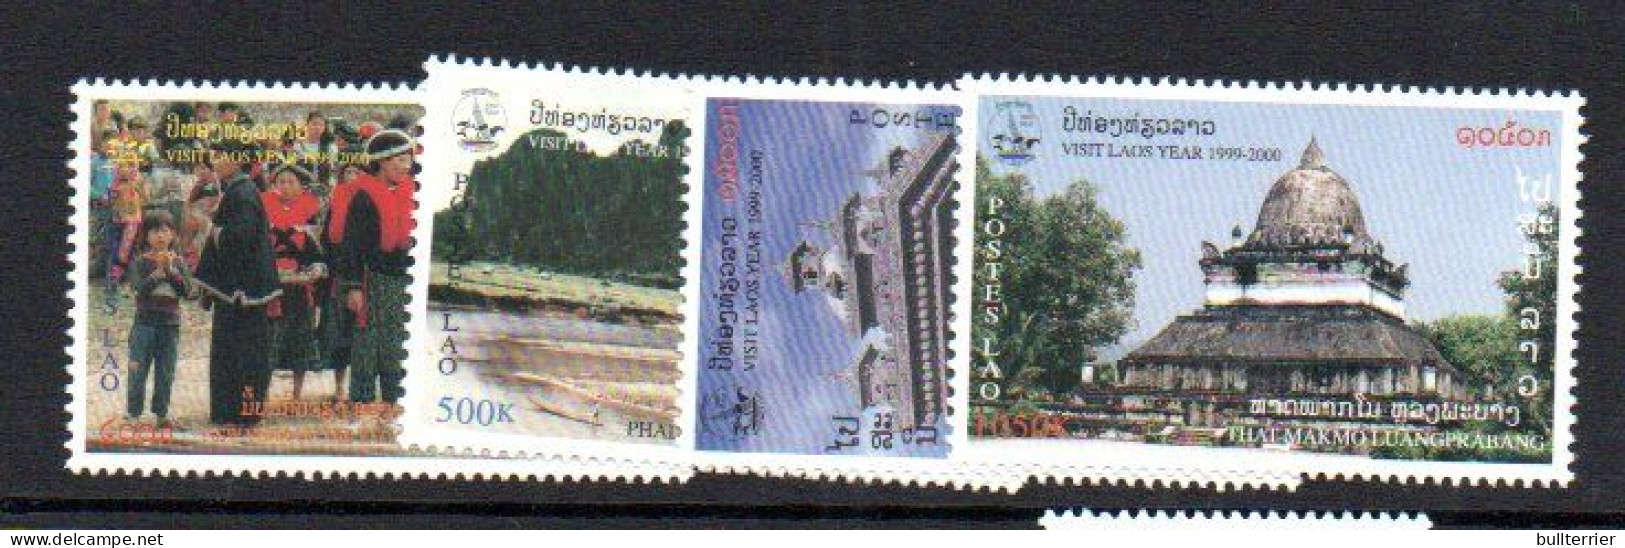 LAOS - 1999 - TOURISM YEAR SET OF 4 MINT NEVER HINGED, - Laos